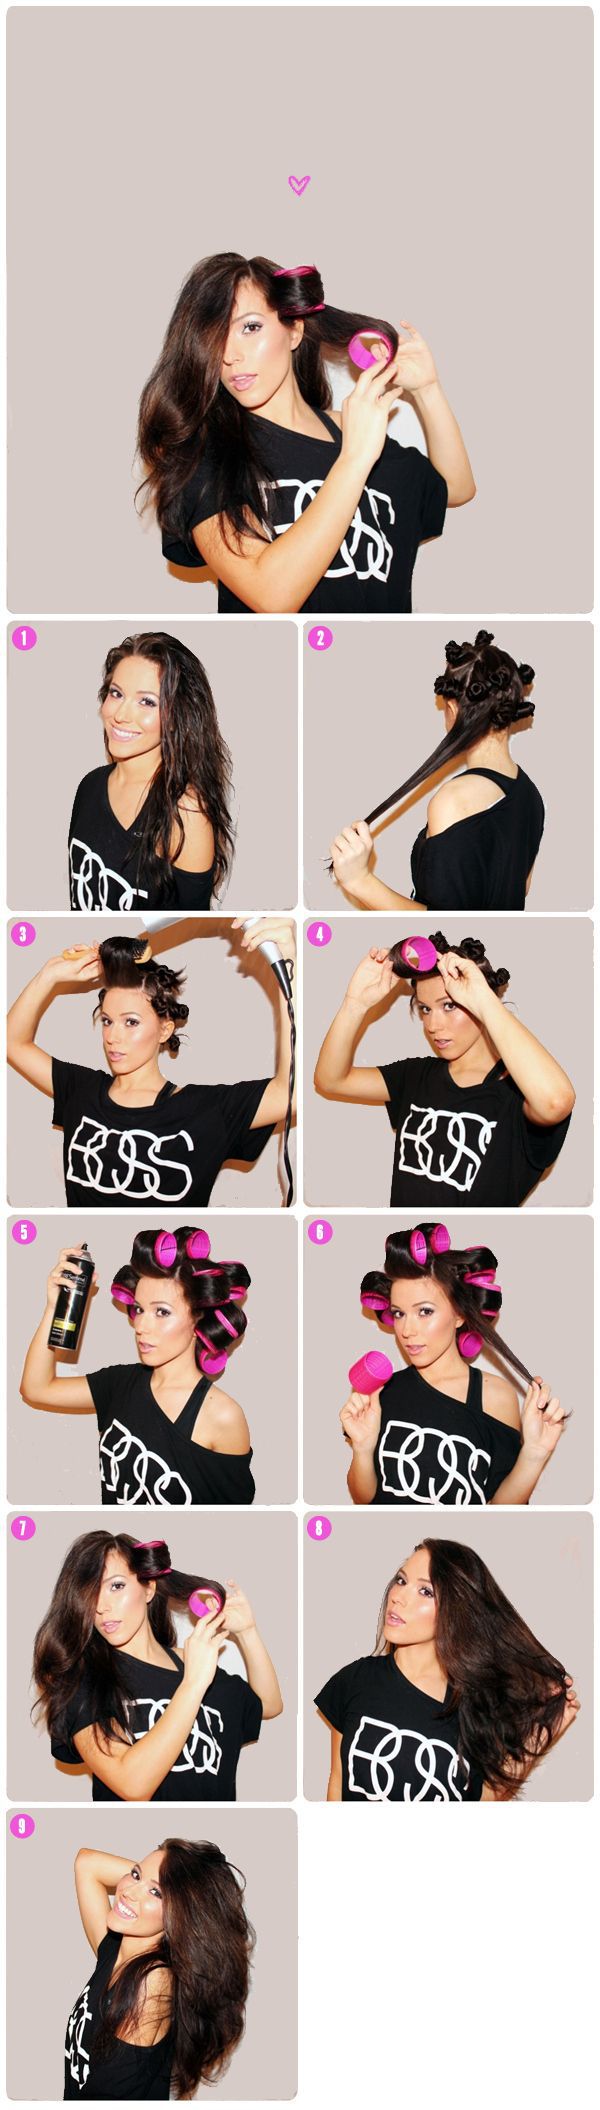  Large velcro curlers for lazy laying. Hairstyling Hacks for Lazy Girl